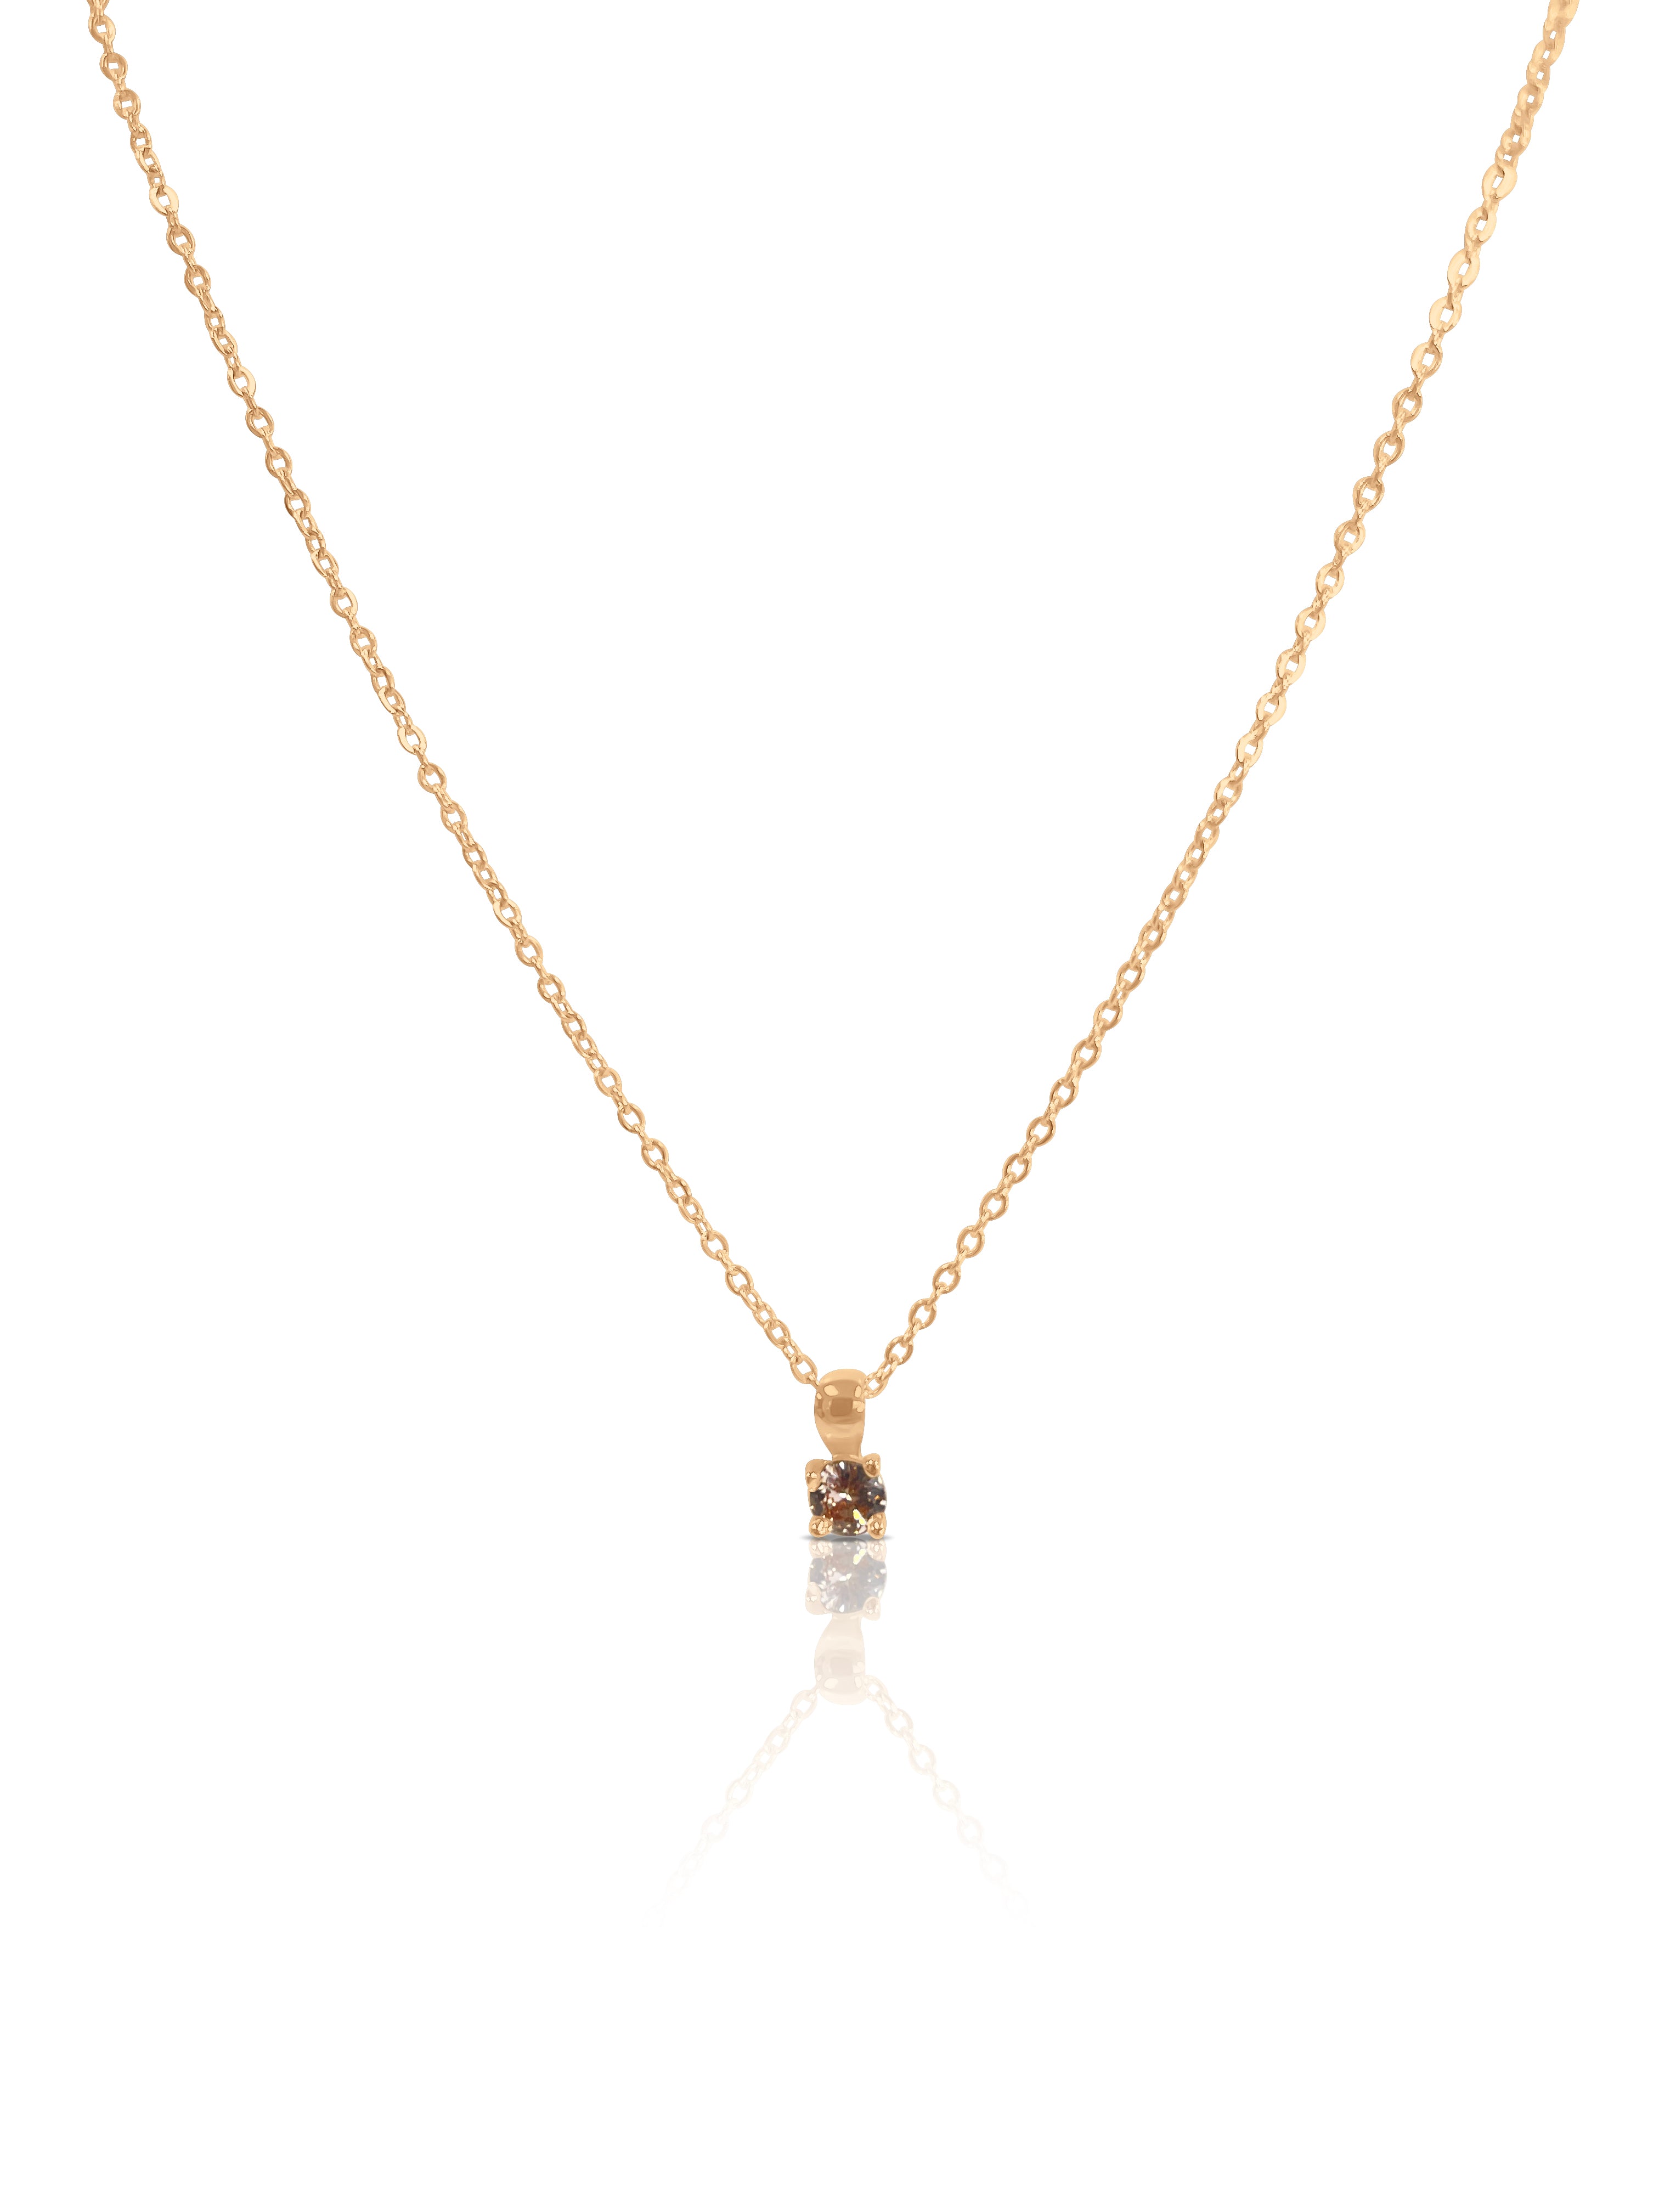 Leah Small Birthstone Necklace